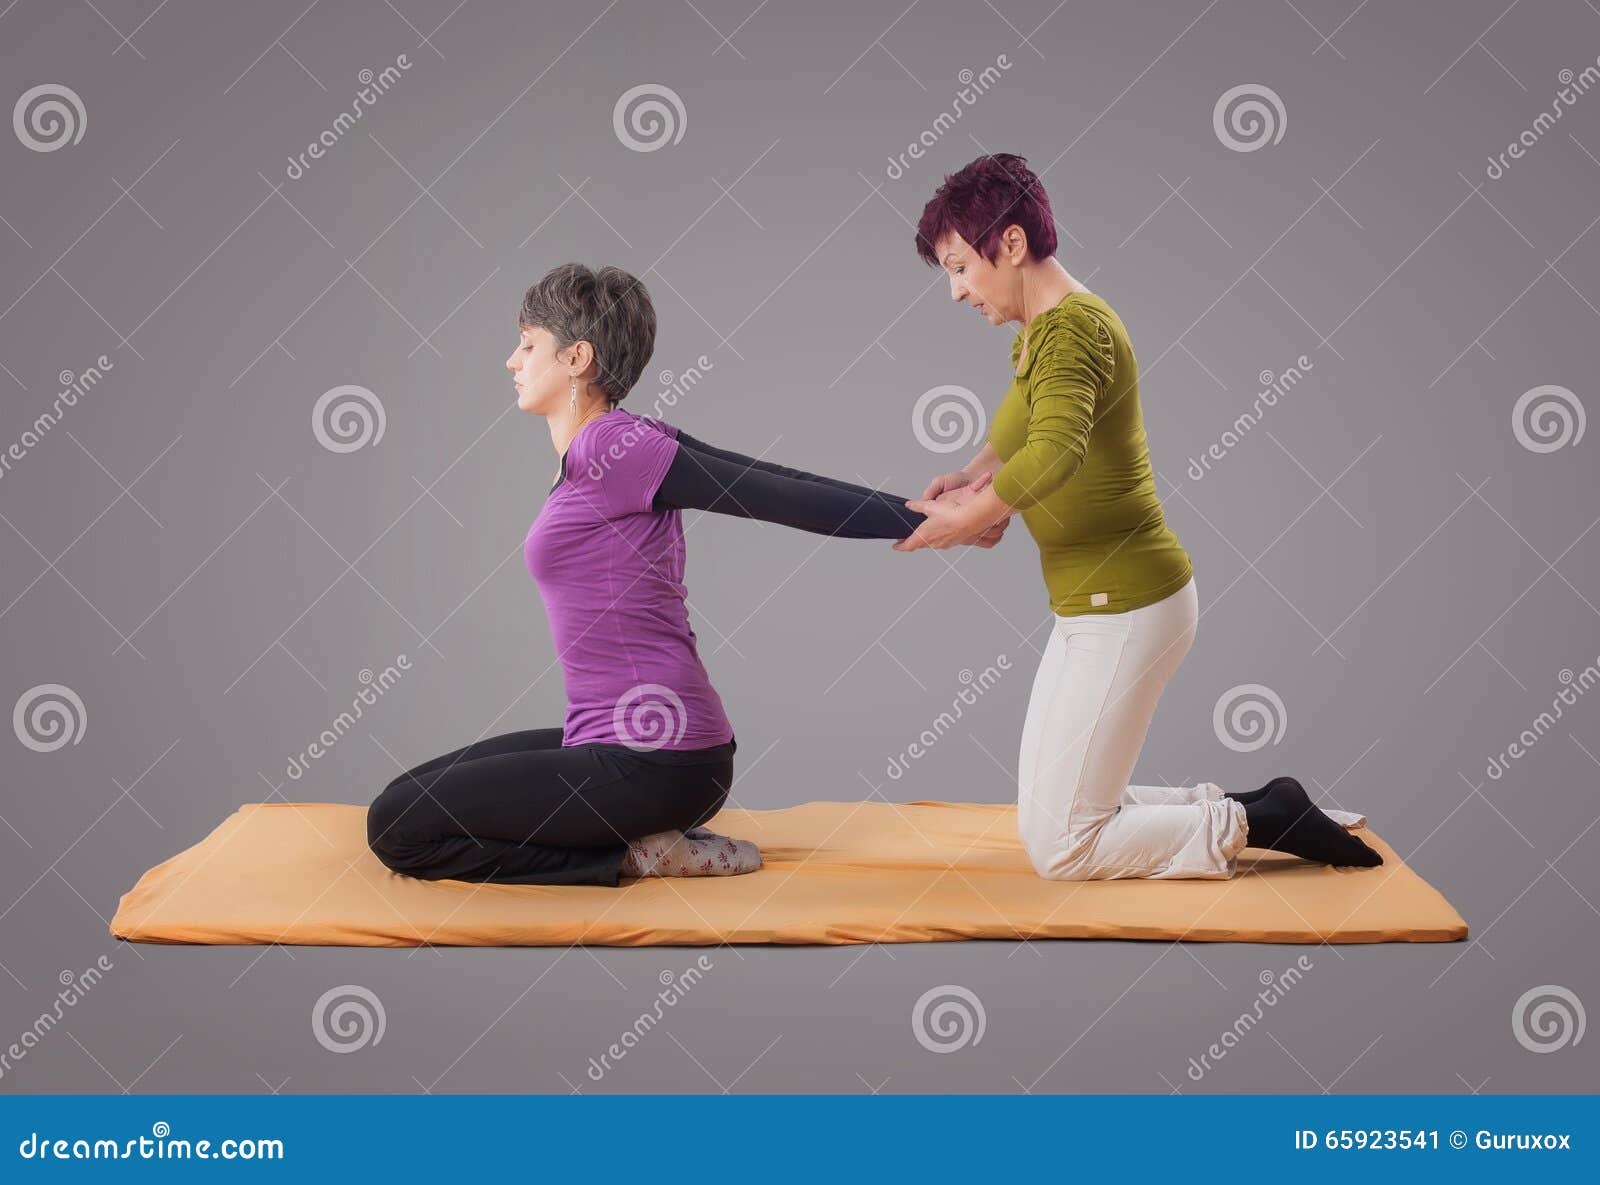 Yumeiho Massage Therapy Stock Image Image Of Alternative 65923541